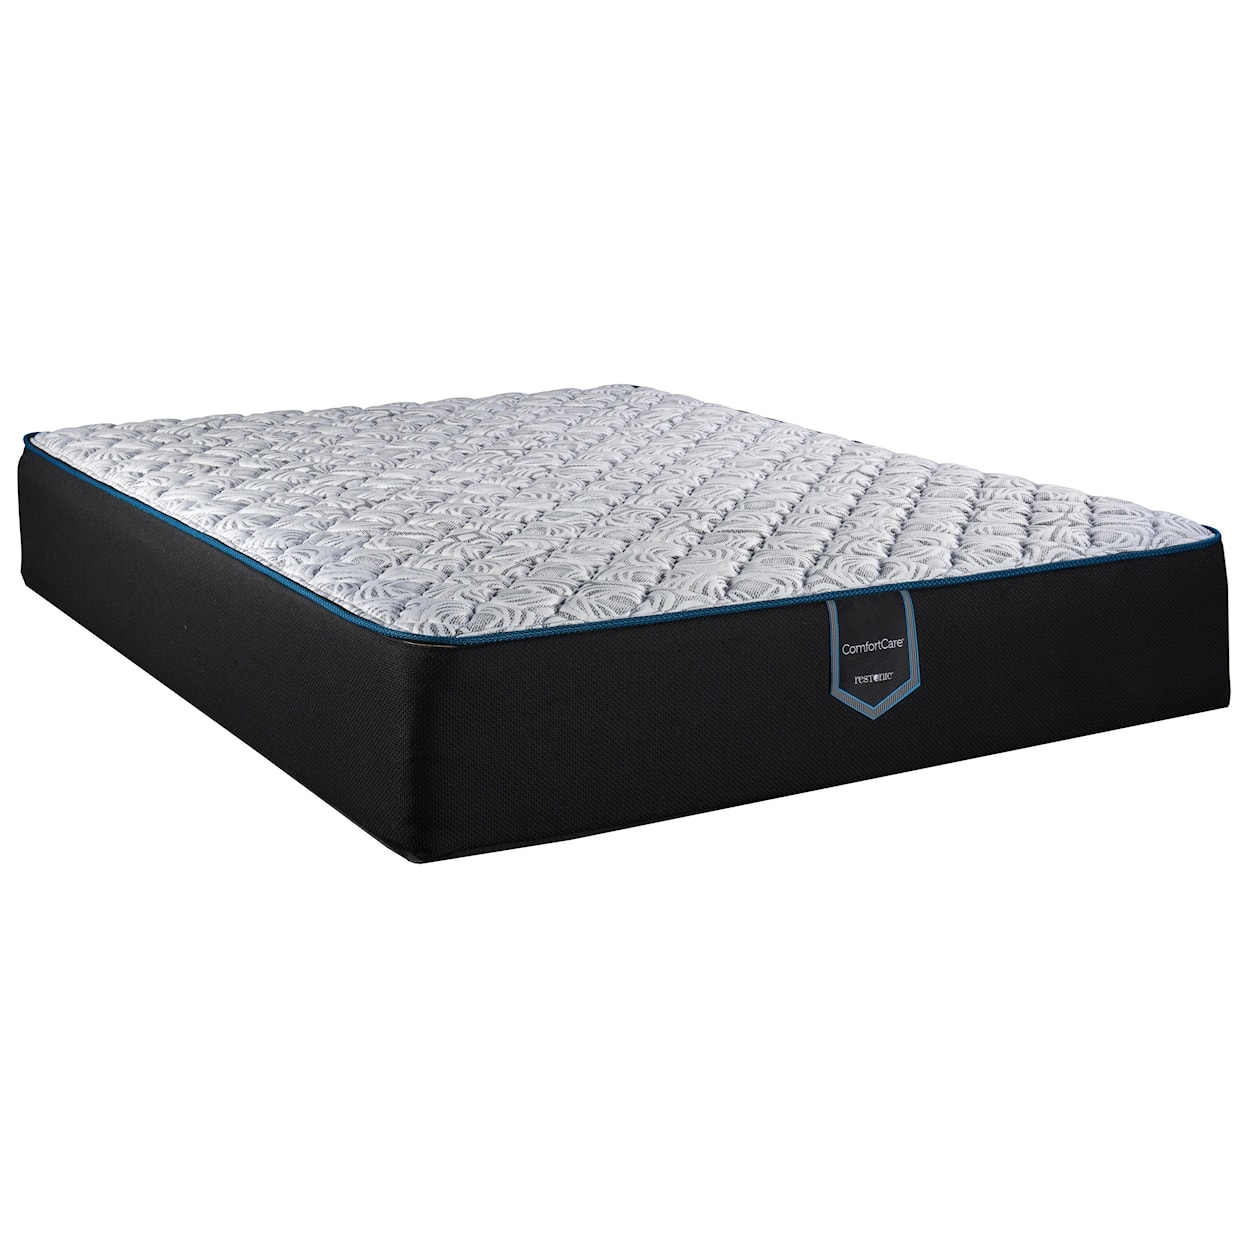 Restonic Arcadia Supreme Extra Firm Cal King 13" Extra Firm Mattress